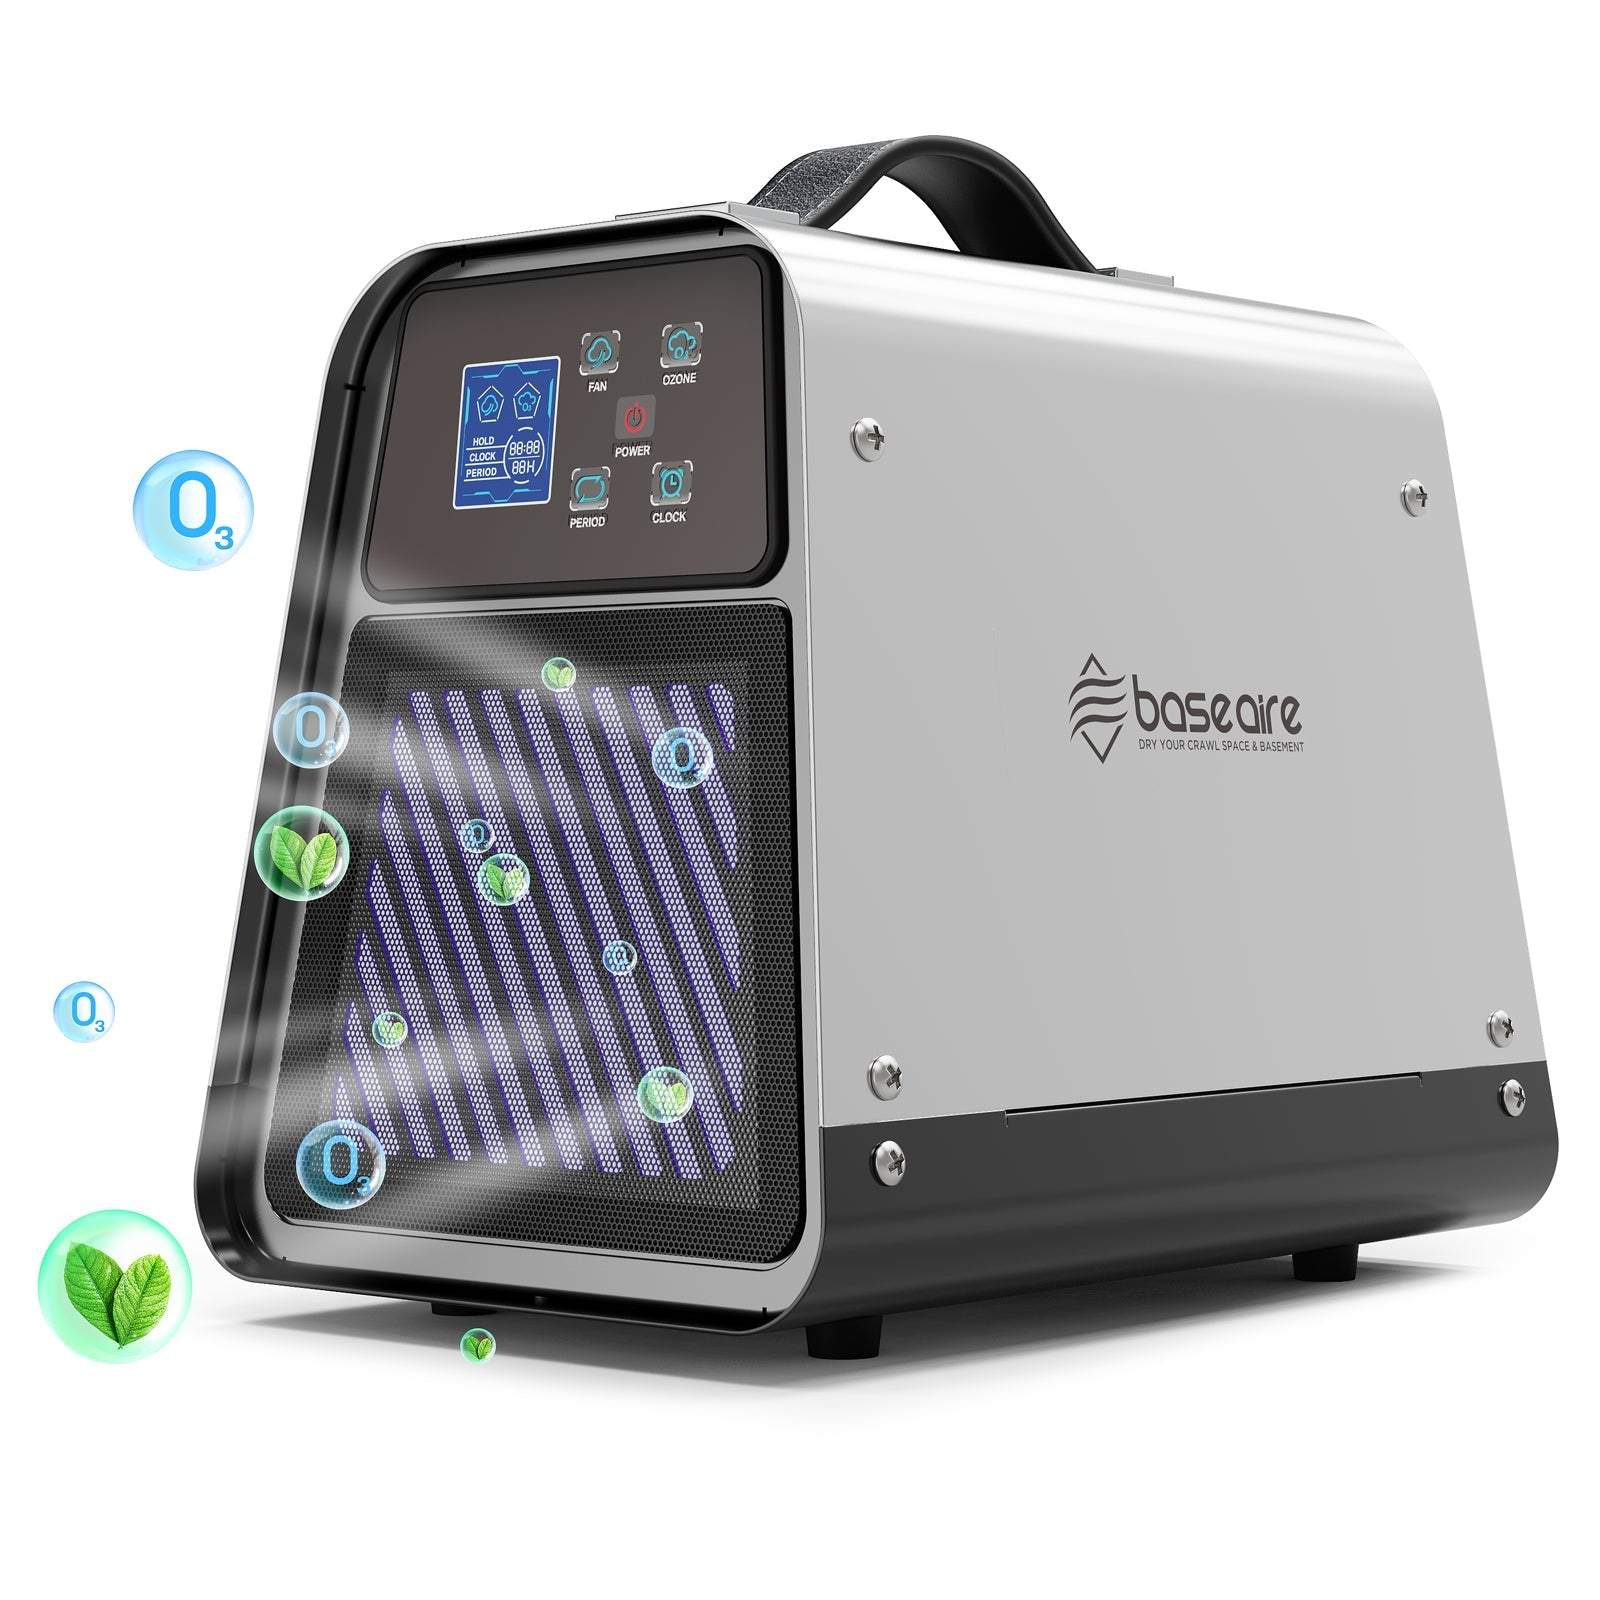 BaseAire 888 Pro 7,000 mg/h Ozone Generator, Digital O3 Machine Home Ozone Machine Deodorizer - Ozone Generator from [store] by Baseaire - Disinfection, Ozone Generator